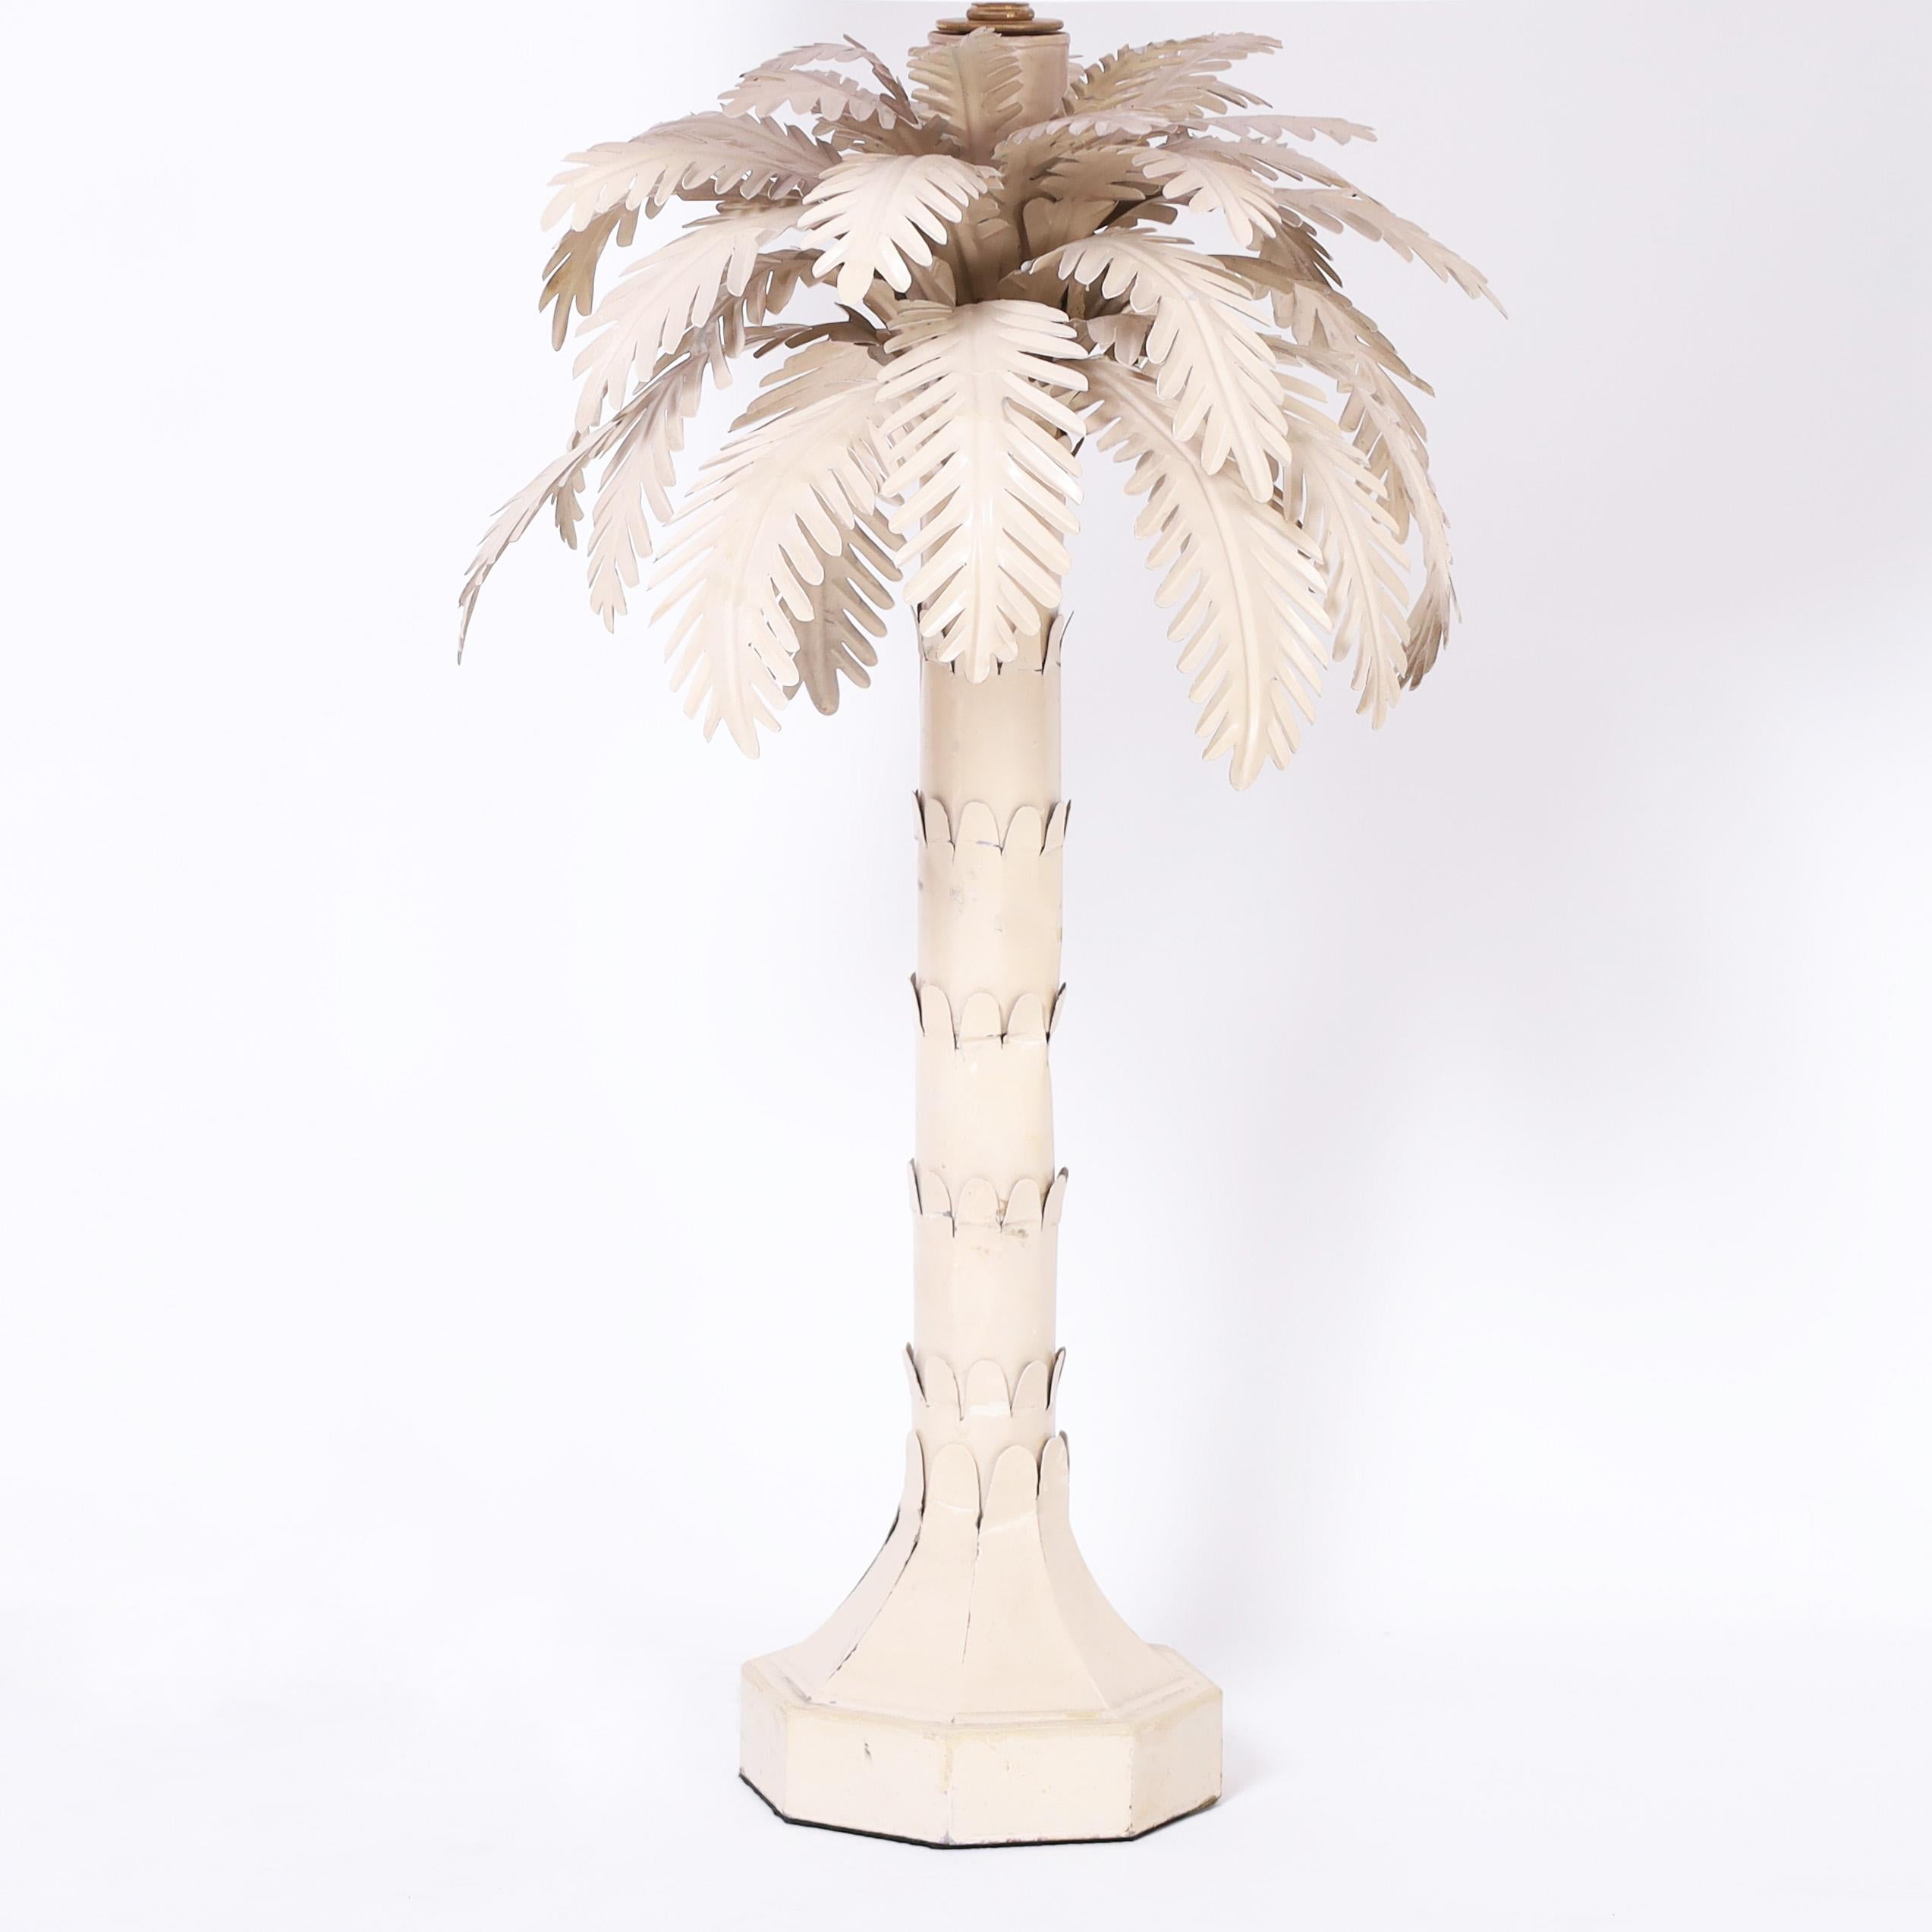 Vintage Italian table lamp crafted in metal with an off white lacquer finish in a chic stylized palm tree form.